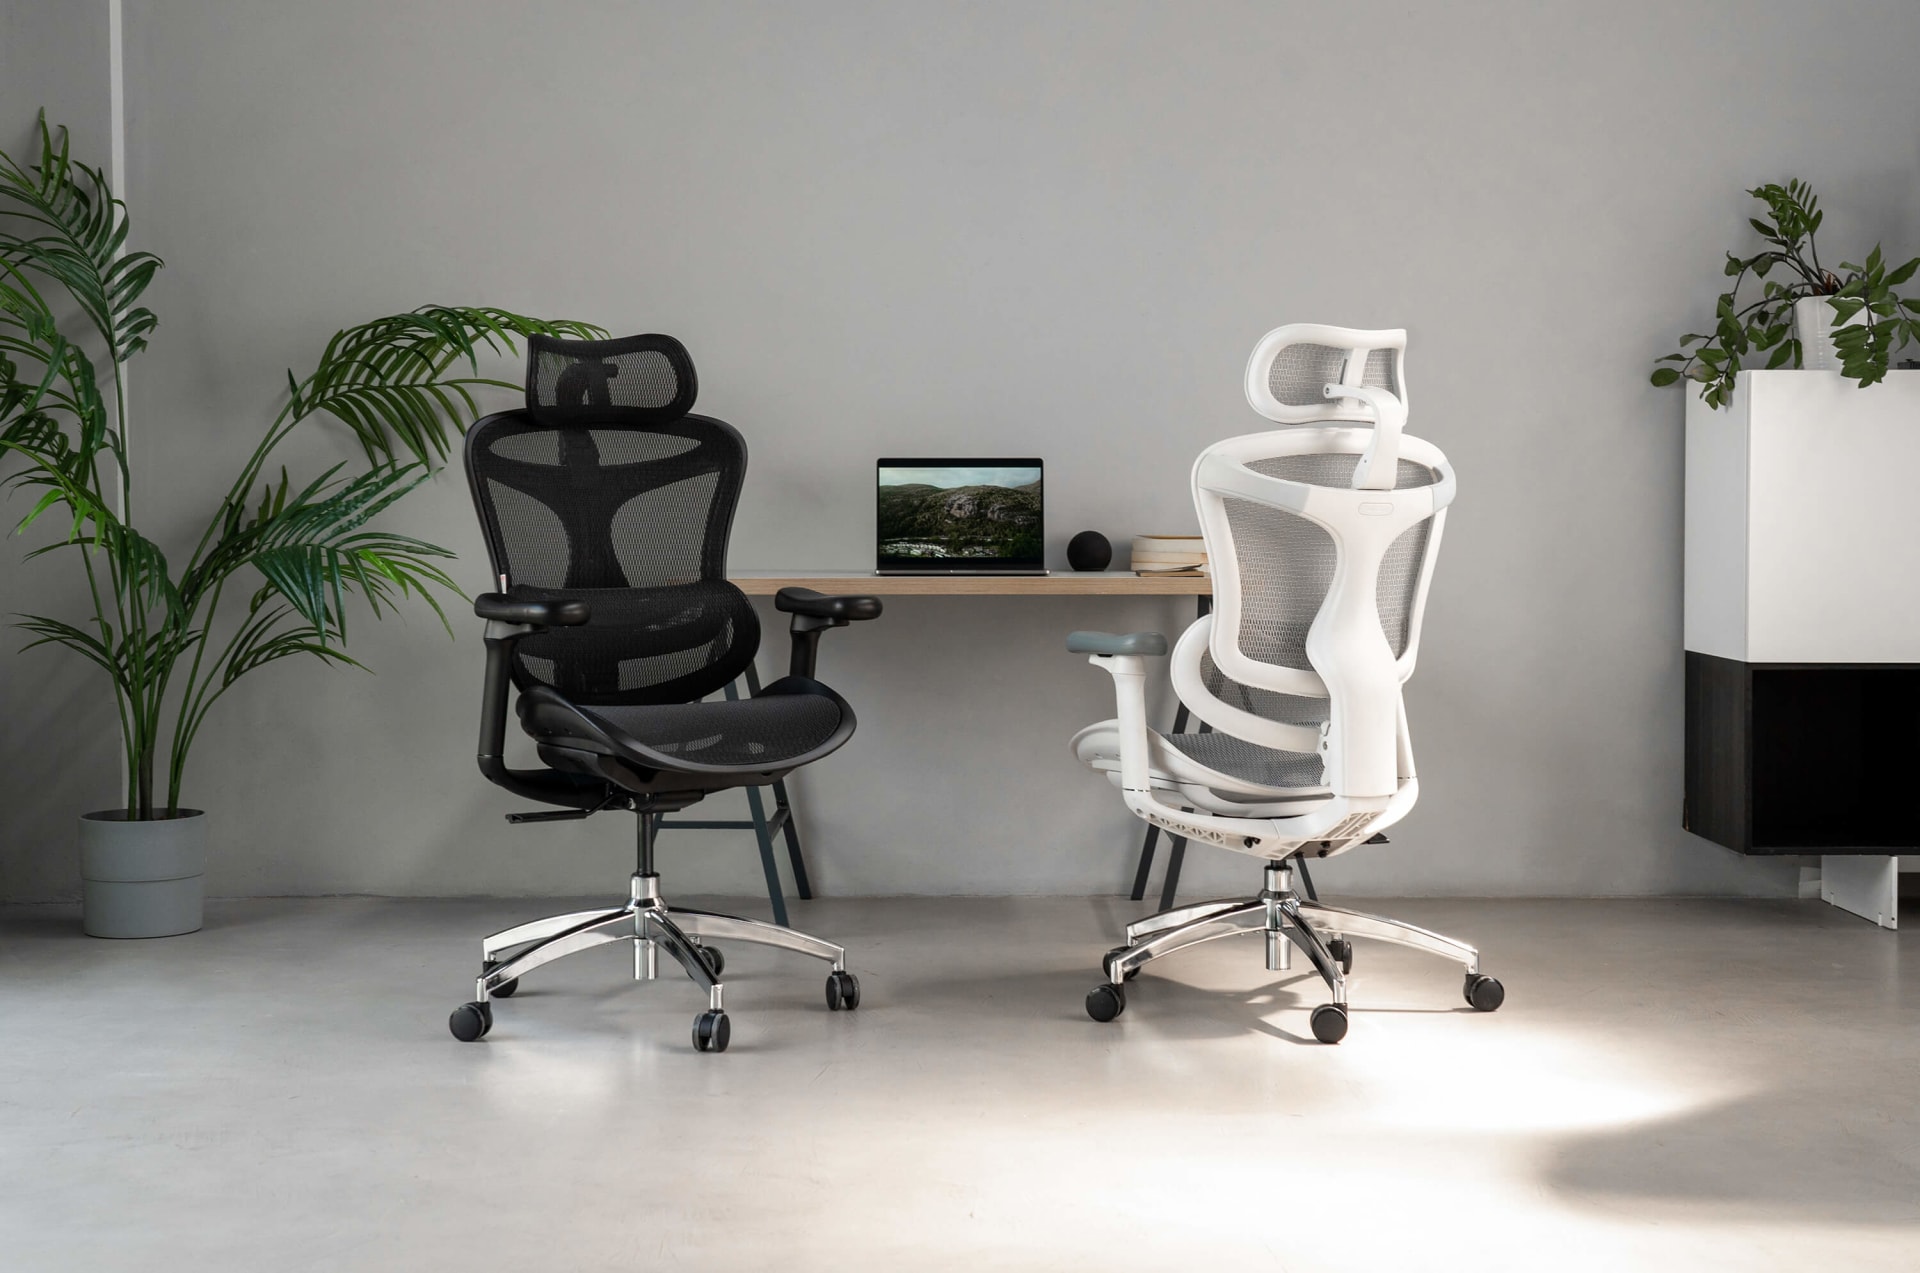 Sihoo ergonomic chair black and white color